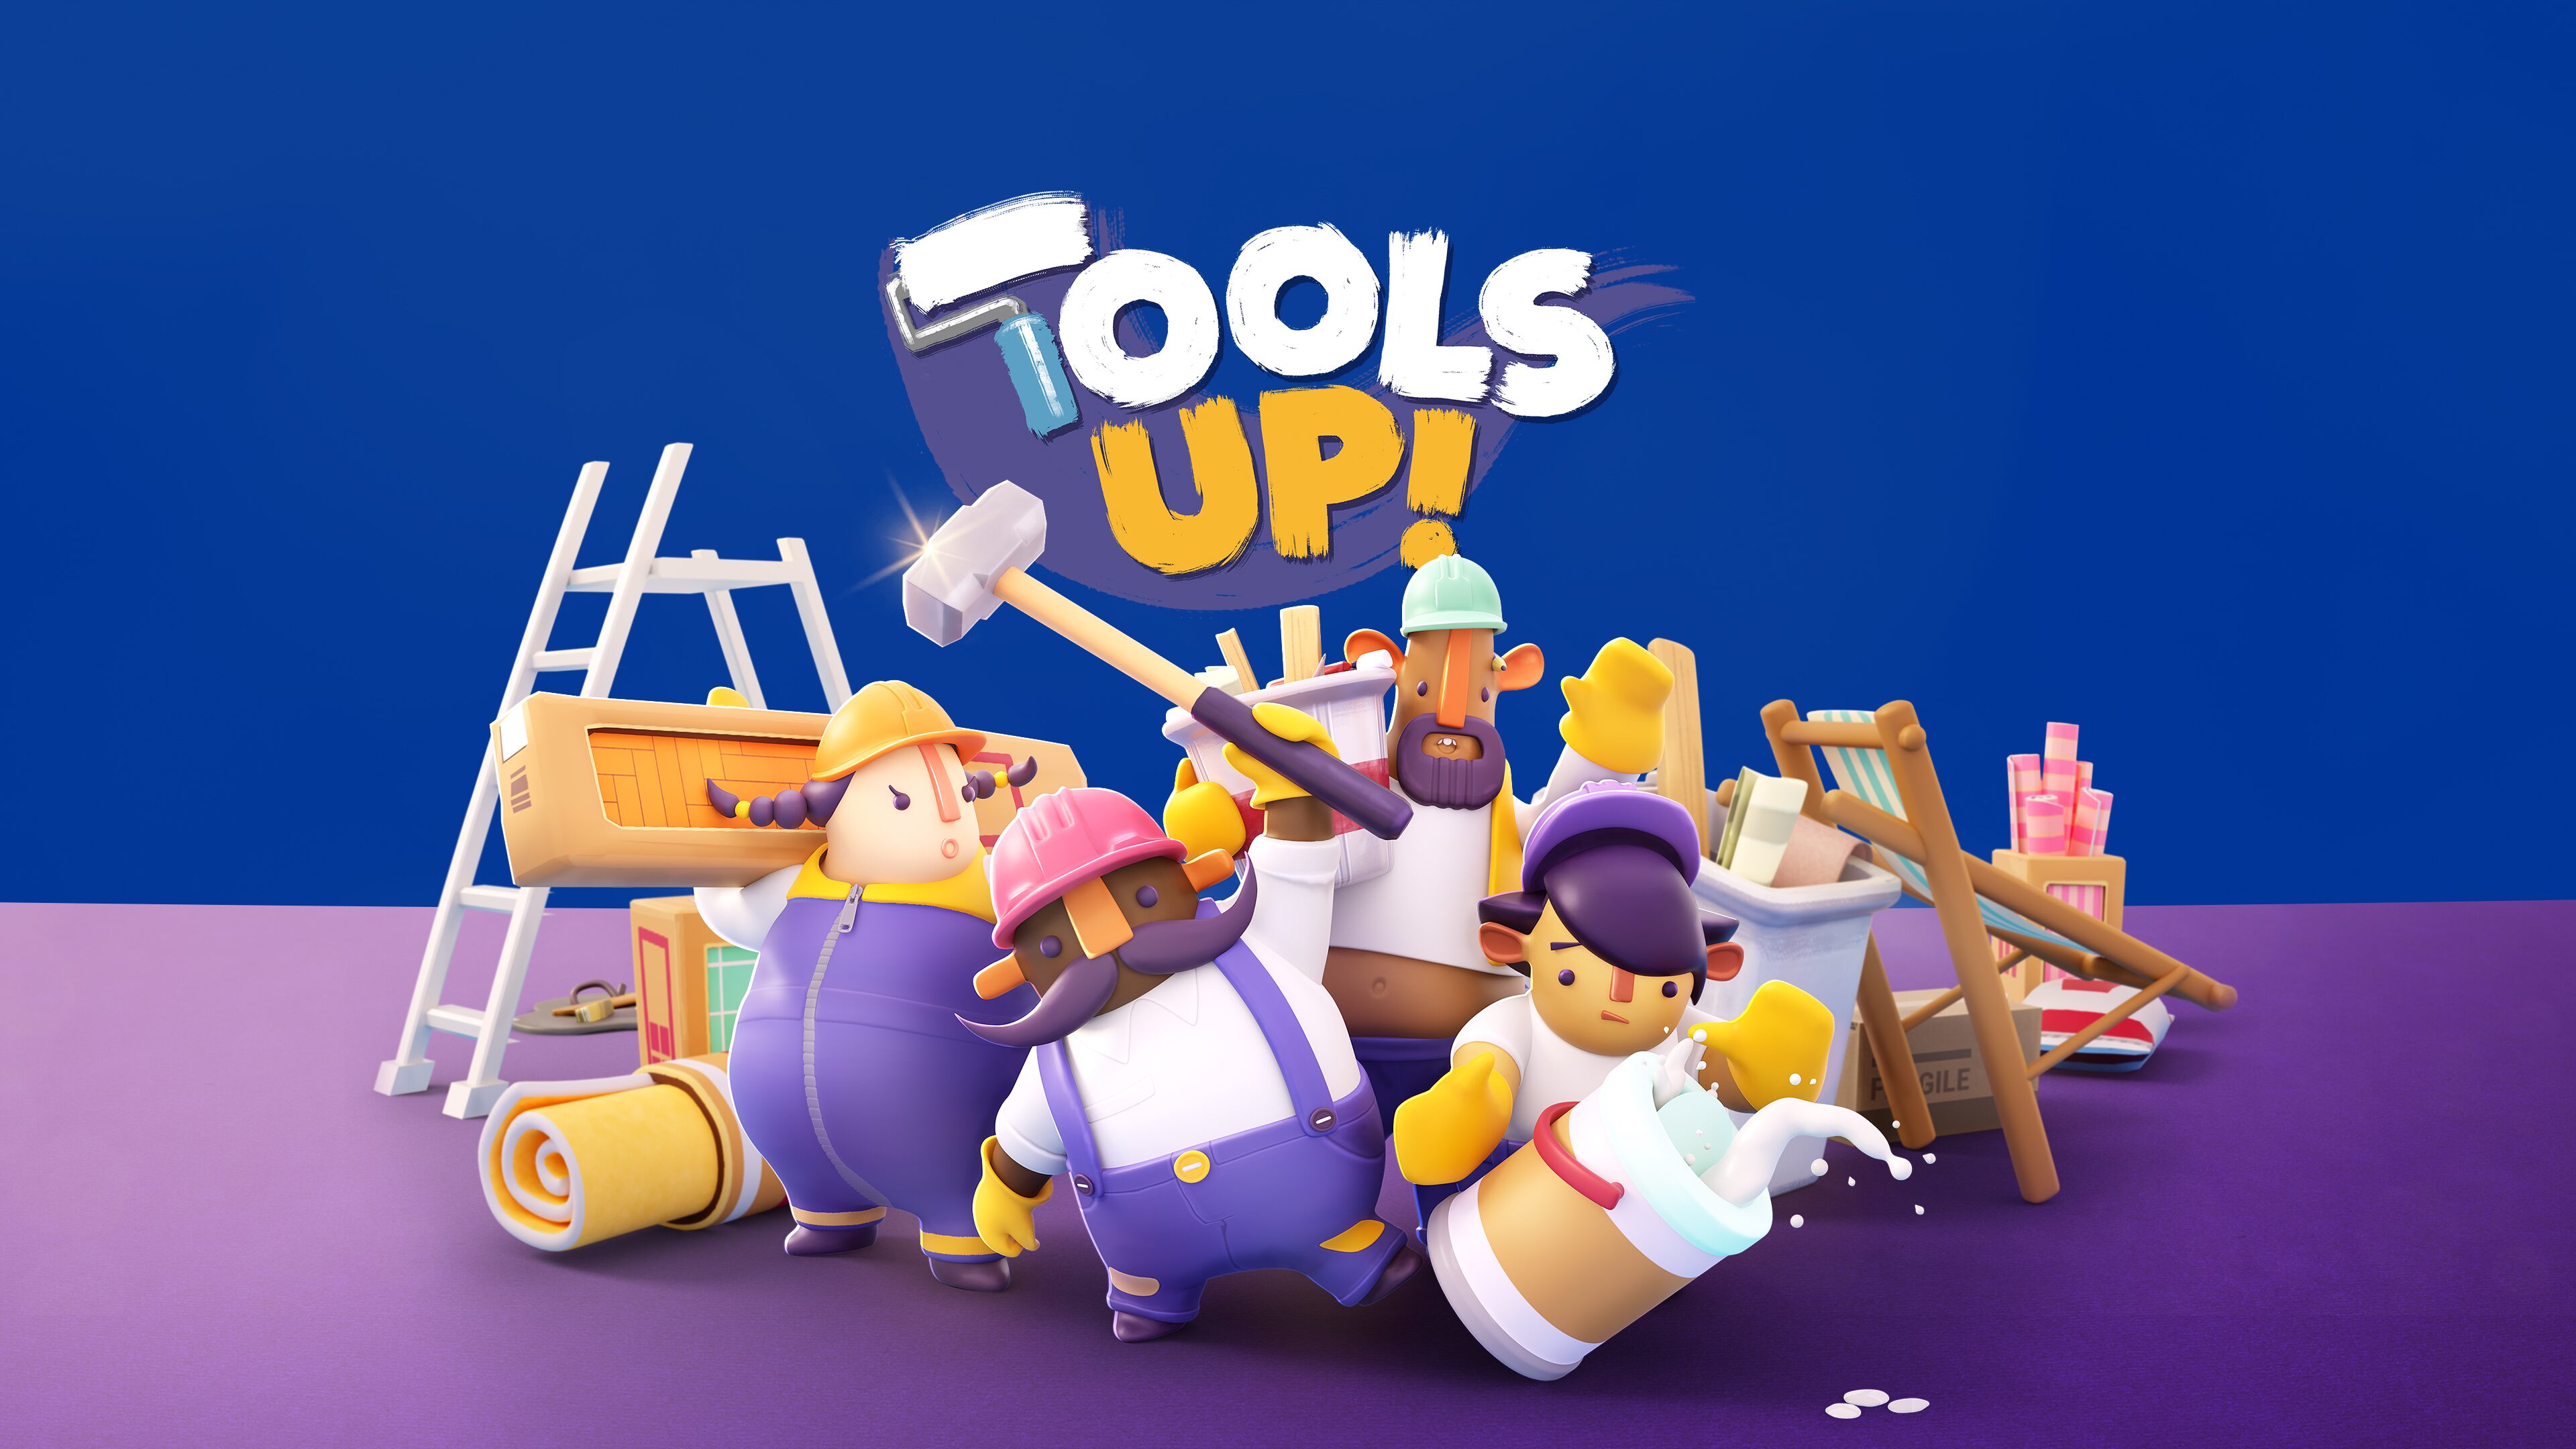 Tools Up! Demo